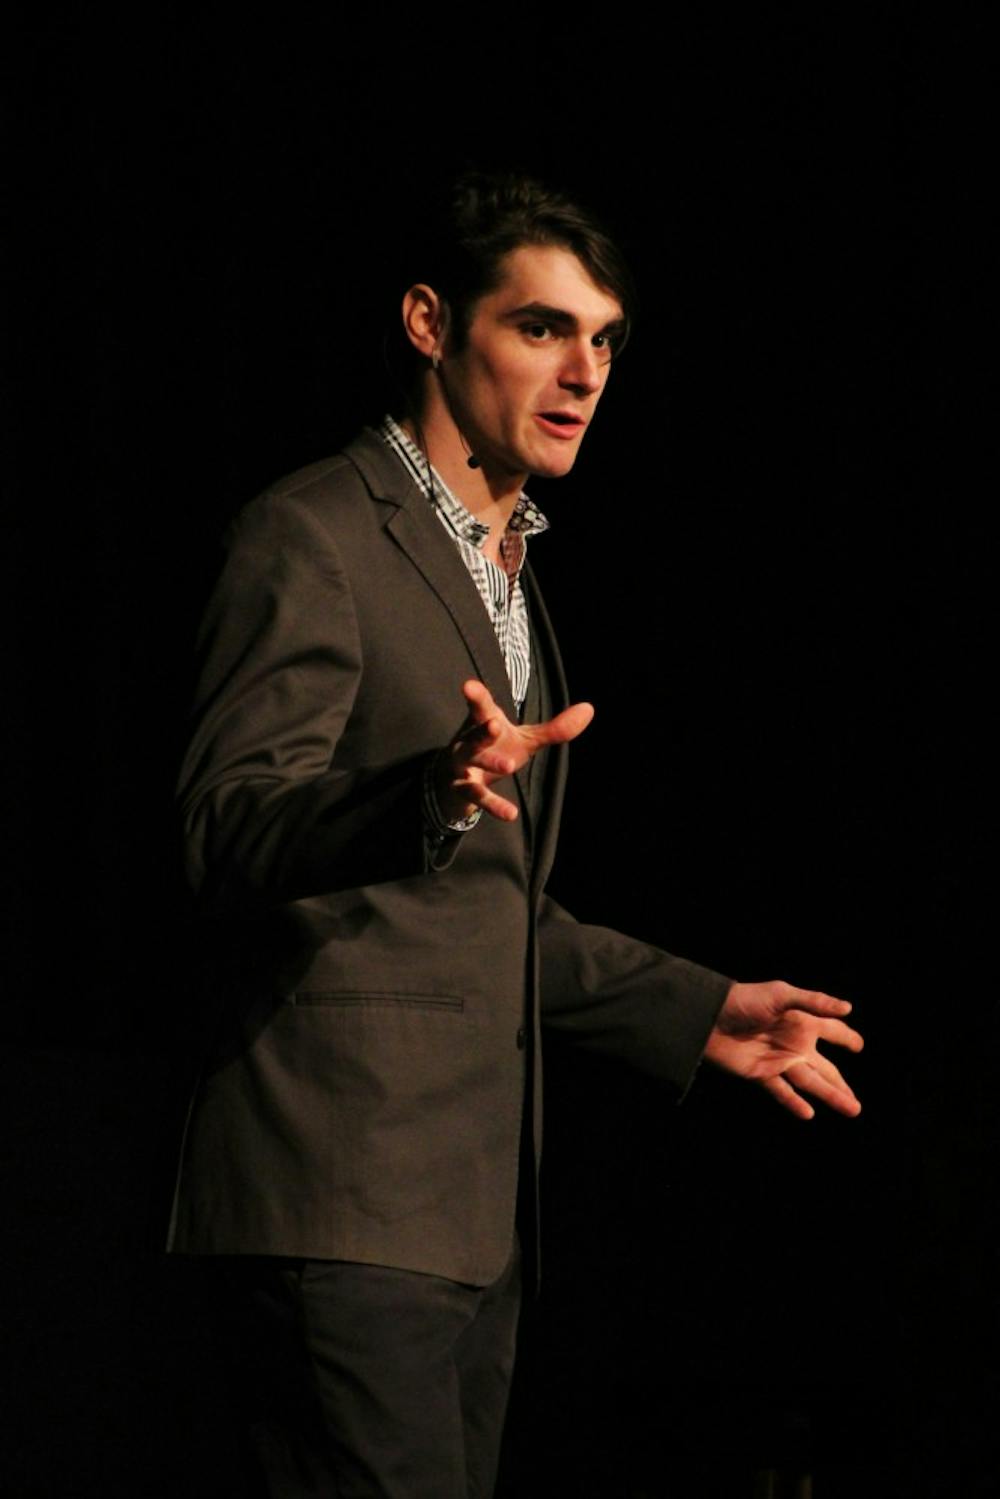 	<p>Cerebral palsy is a disability without much prominence and publicity, something that RJ Mitte, first as Walt Jr. on “Breaking Bad” and now through public speaking around the country, is seeking to change for the better.</p>